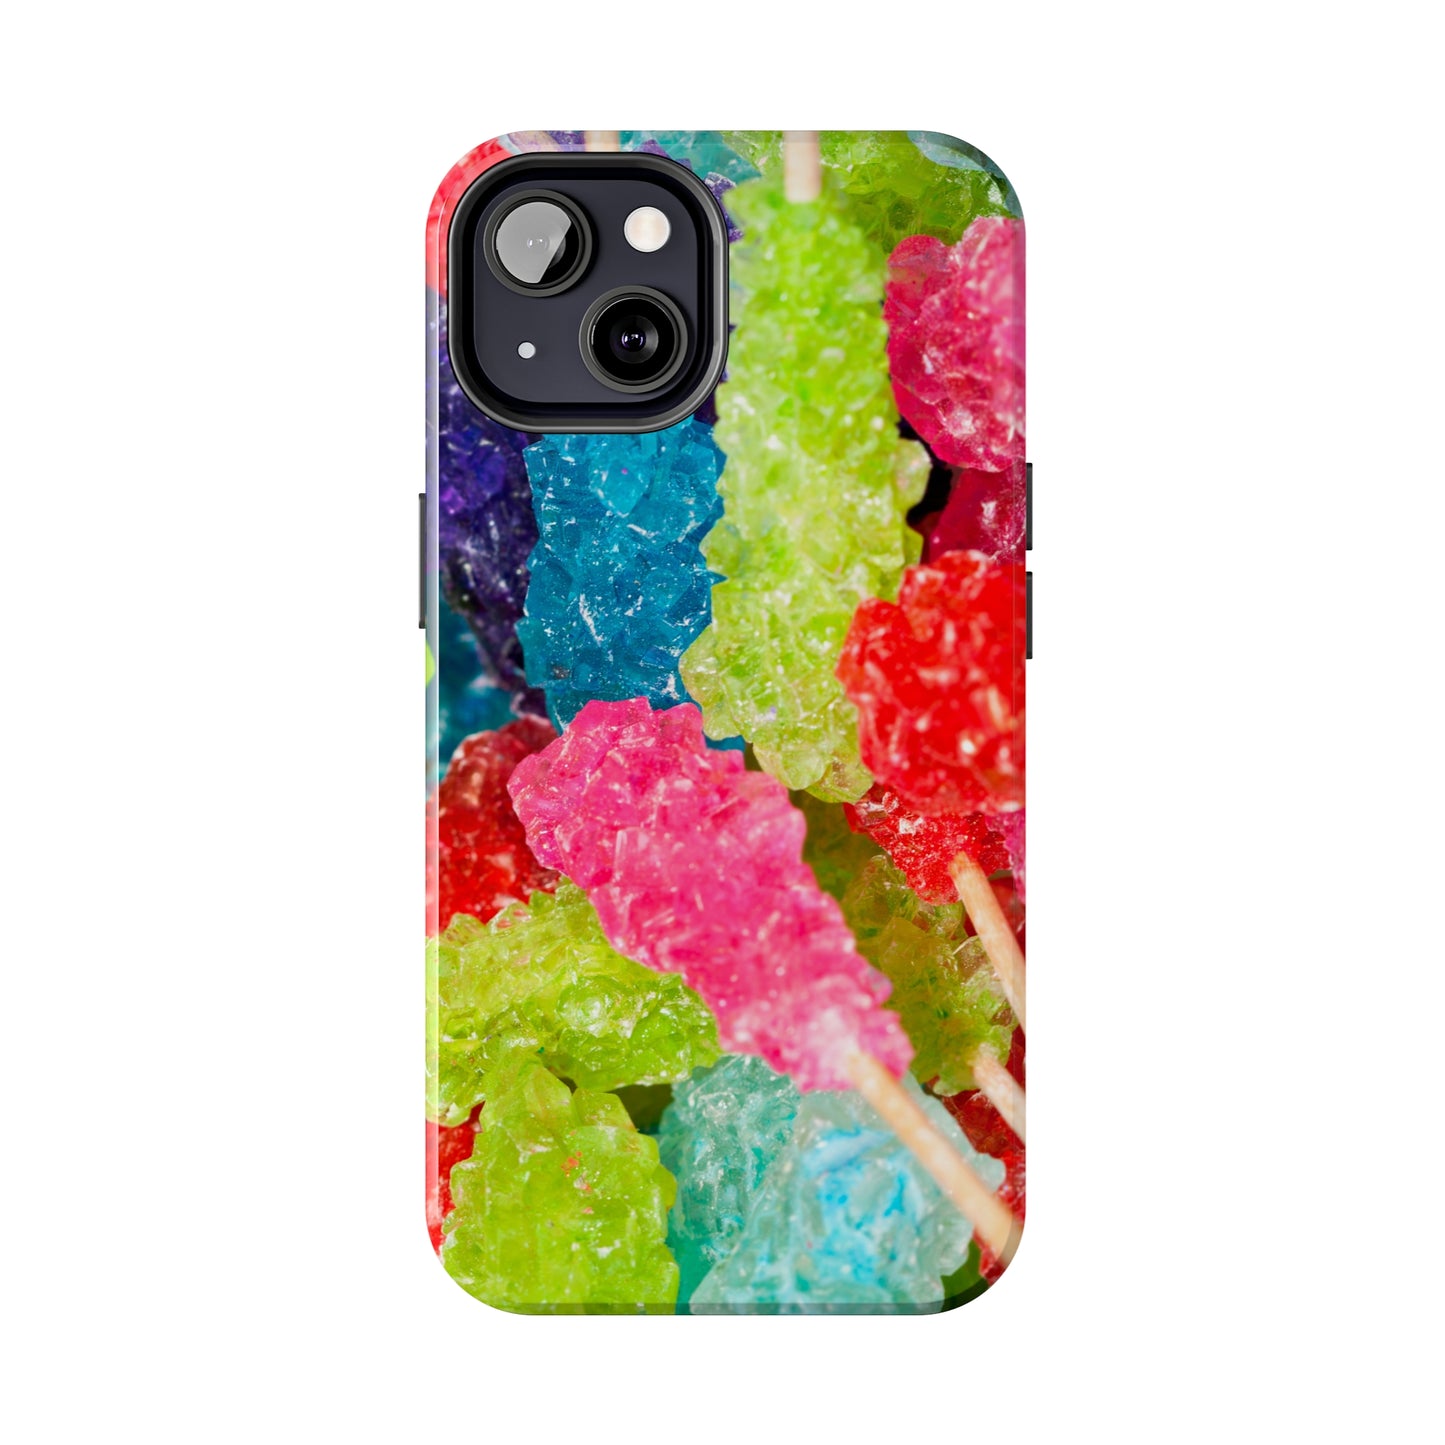 Rock Candy Phone Case